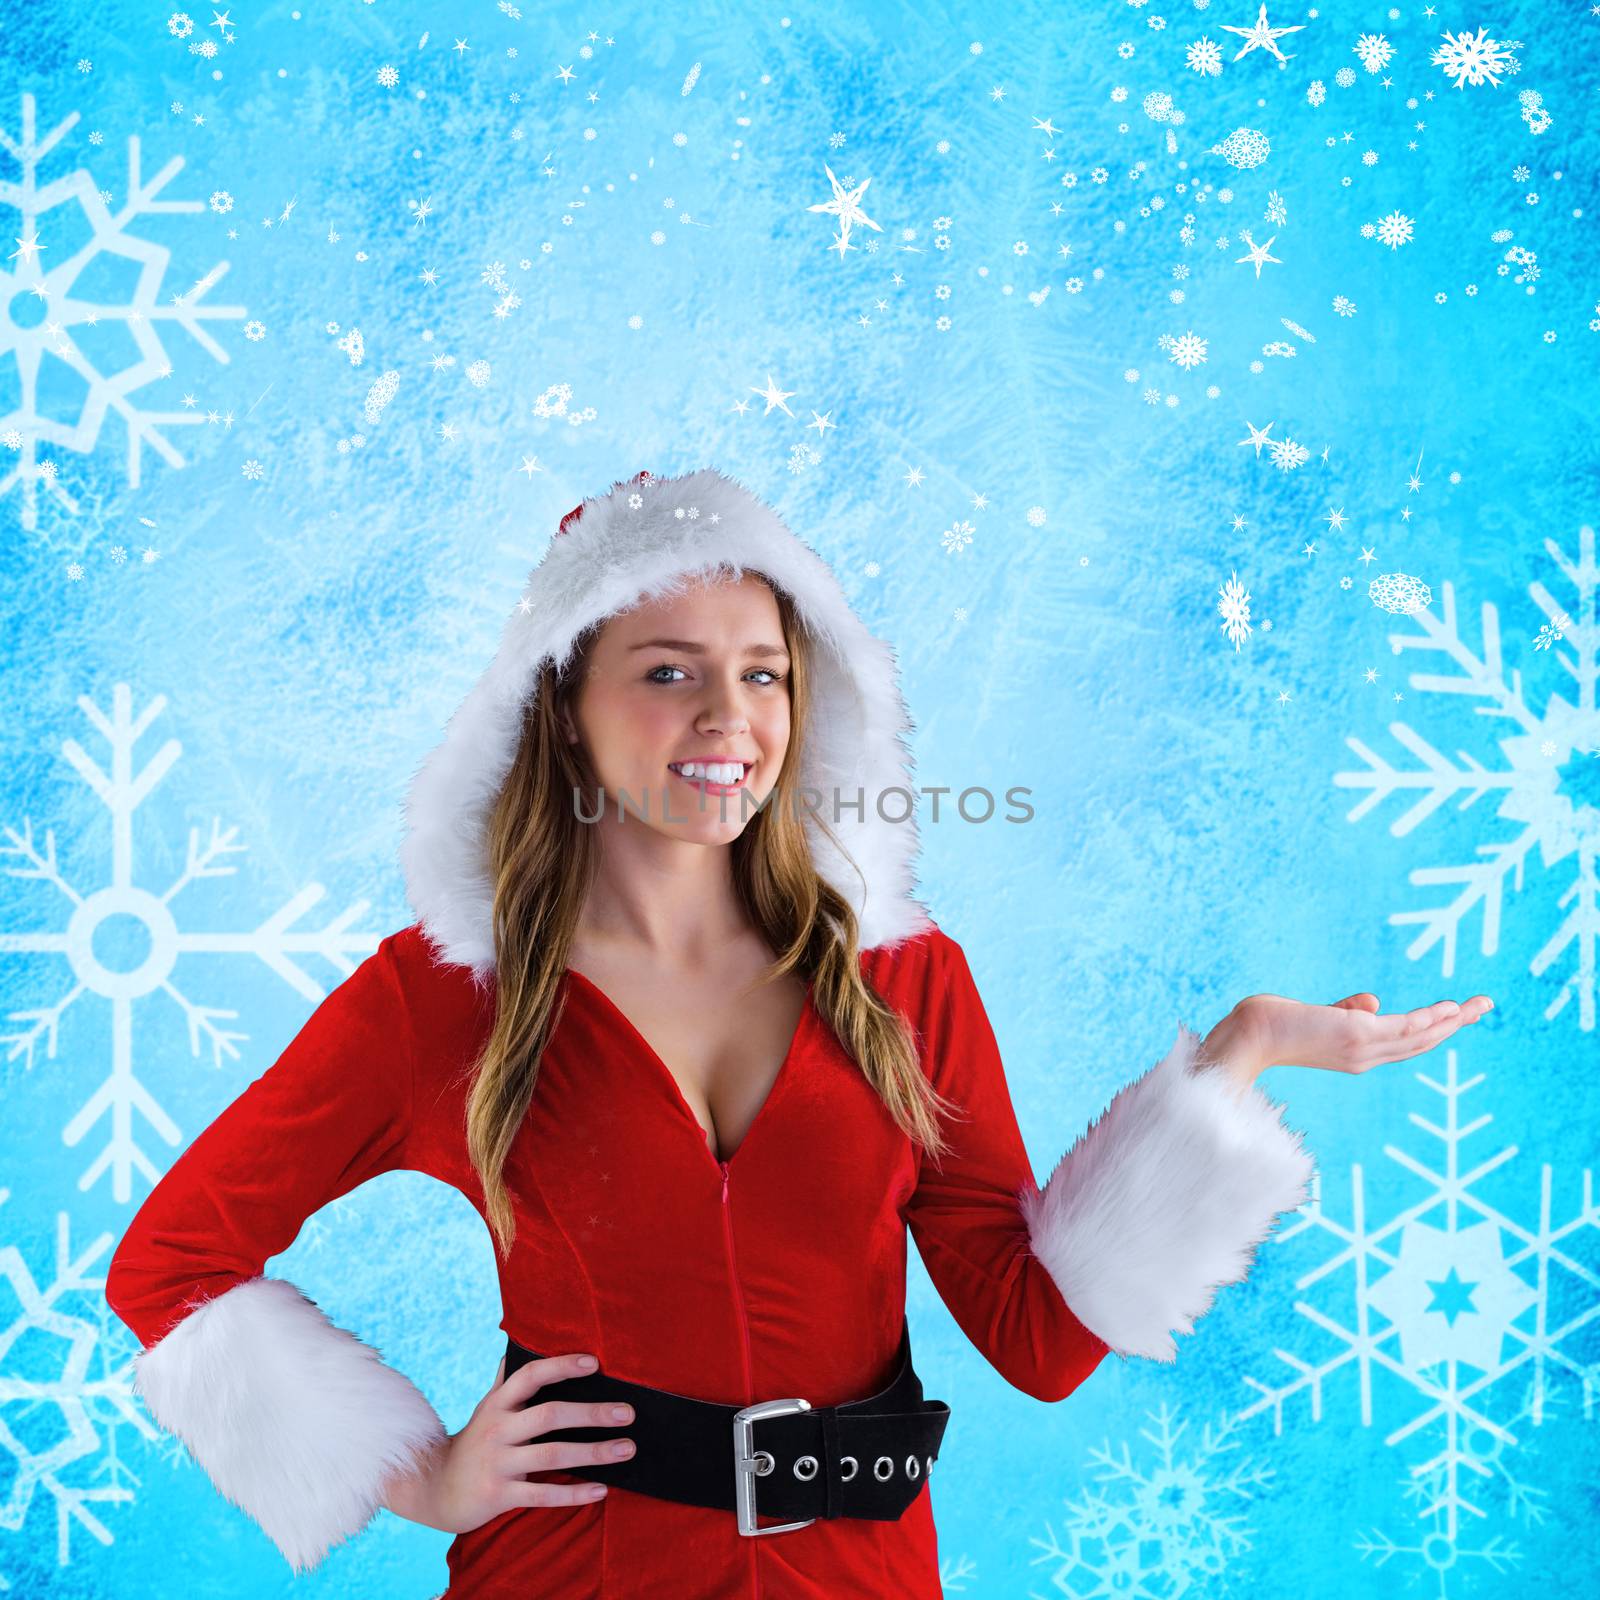 Sexy santa girl presenting with hand against blue snow flake pattern design